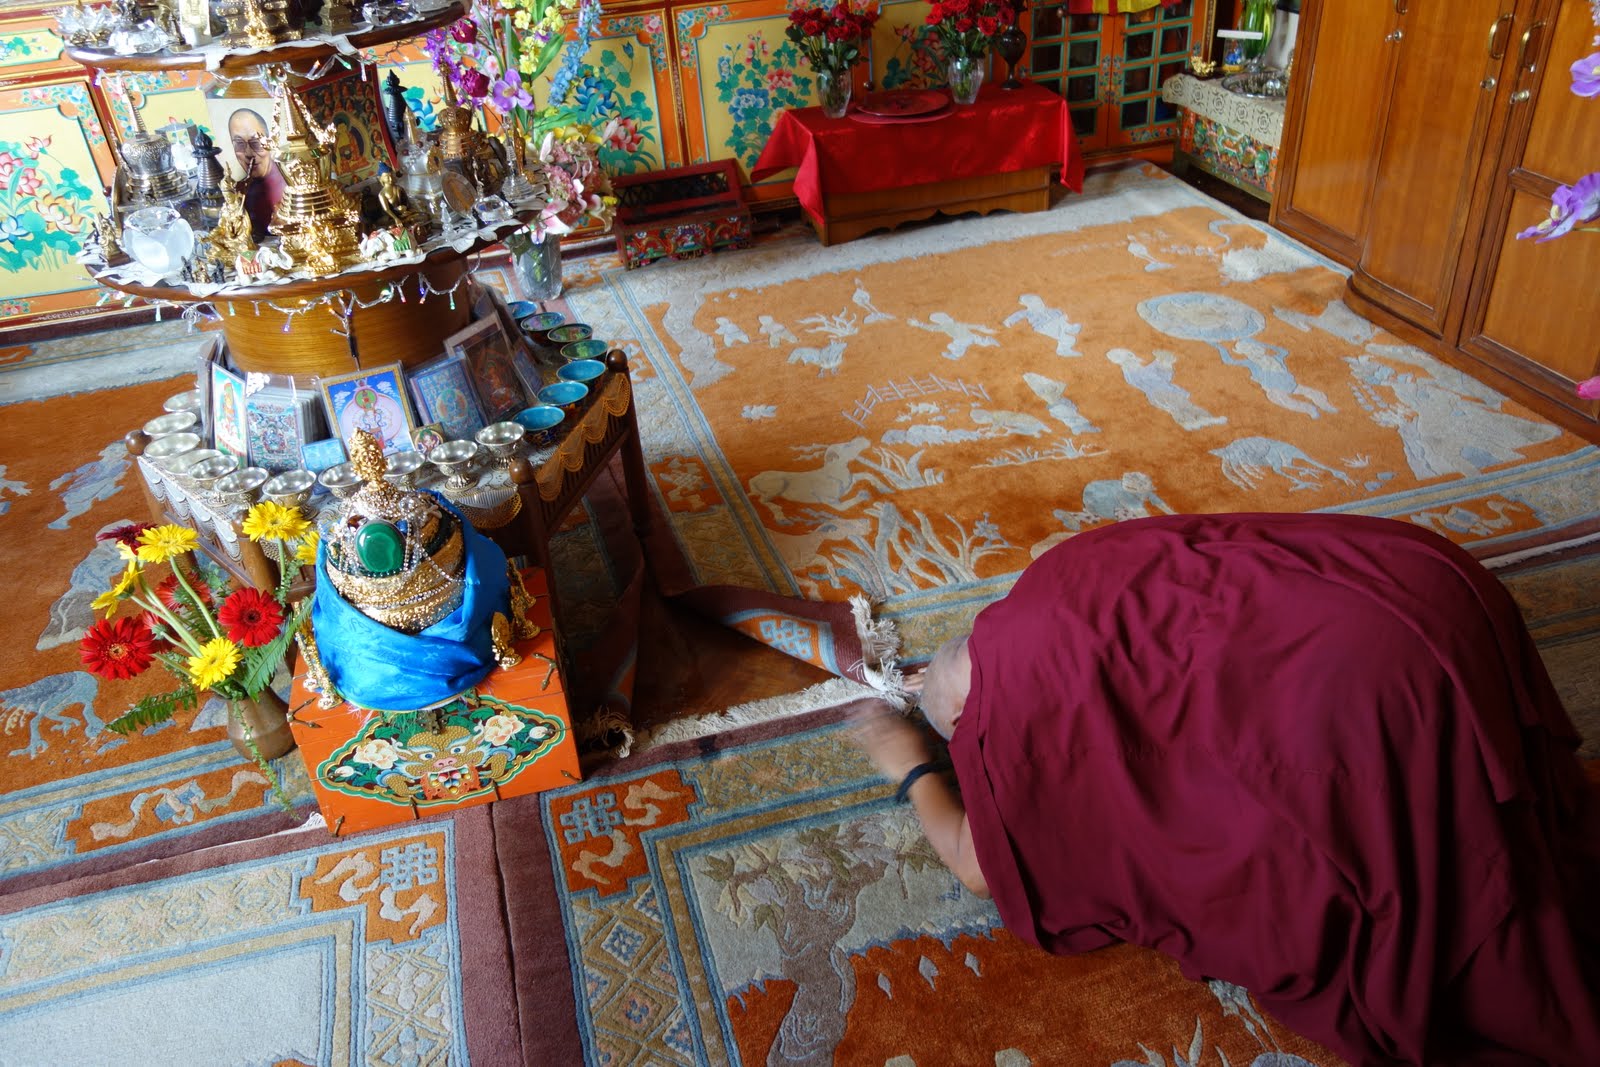 First thing in the morning, Rinpoche is doing prostrations to the altar in his room. There is one altar that has many holy relics on it and Rinpoche circumambulates it every day. Rinpoche is making a very quick stop here on the way to Mongolia. Aug 10, 2013.